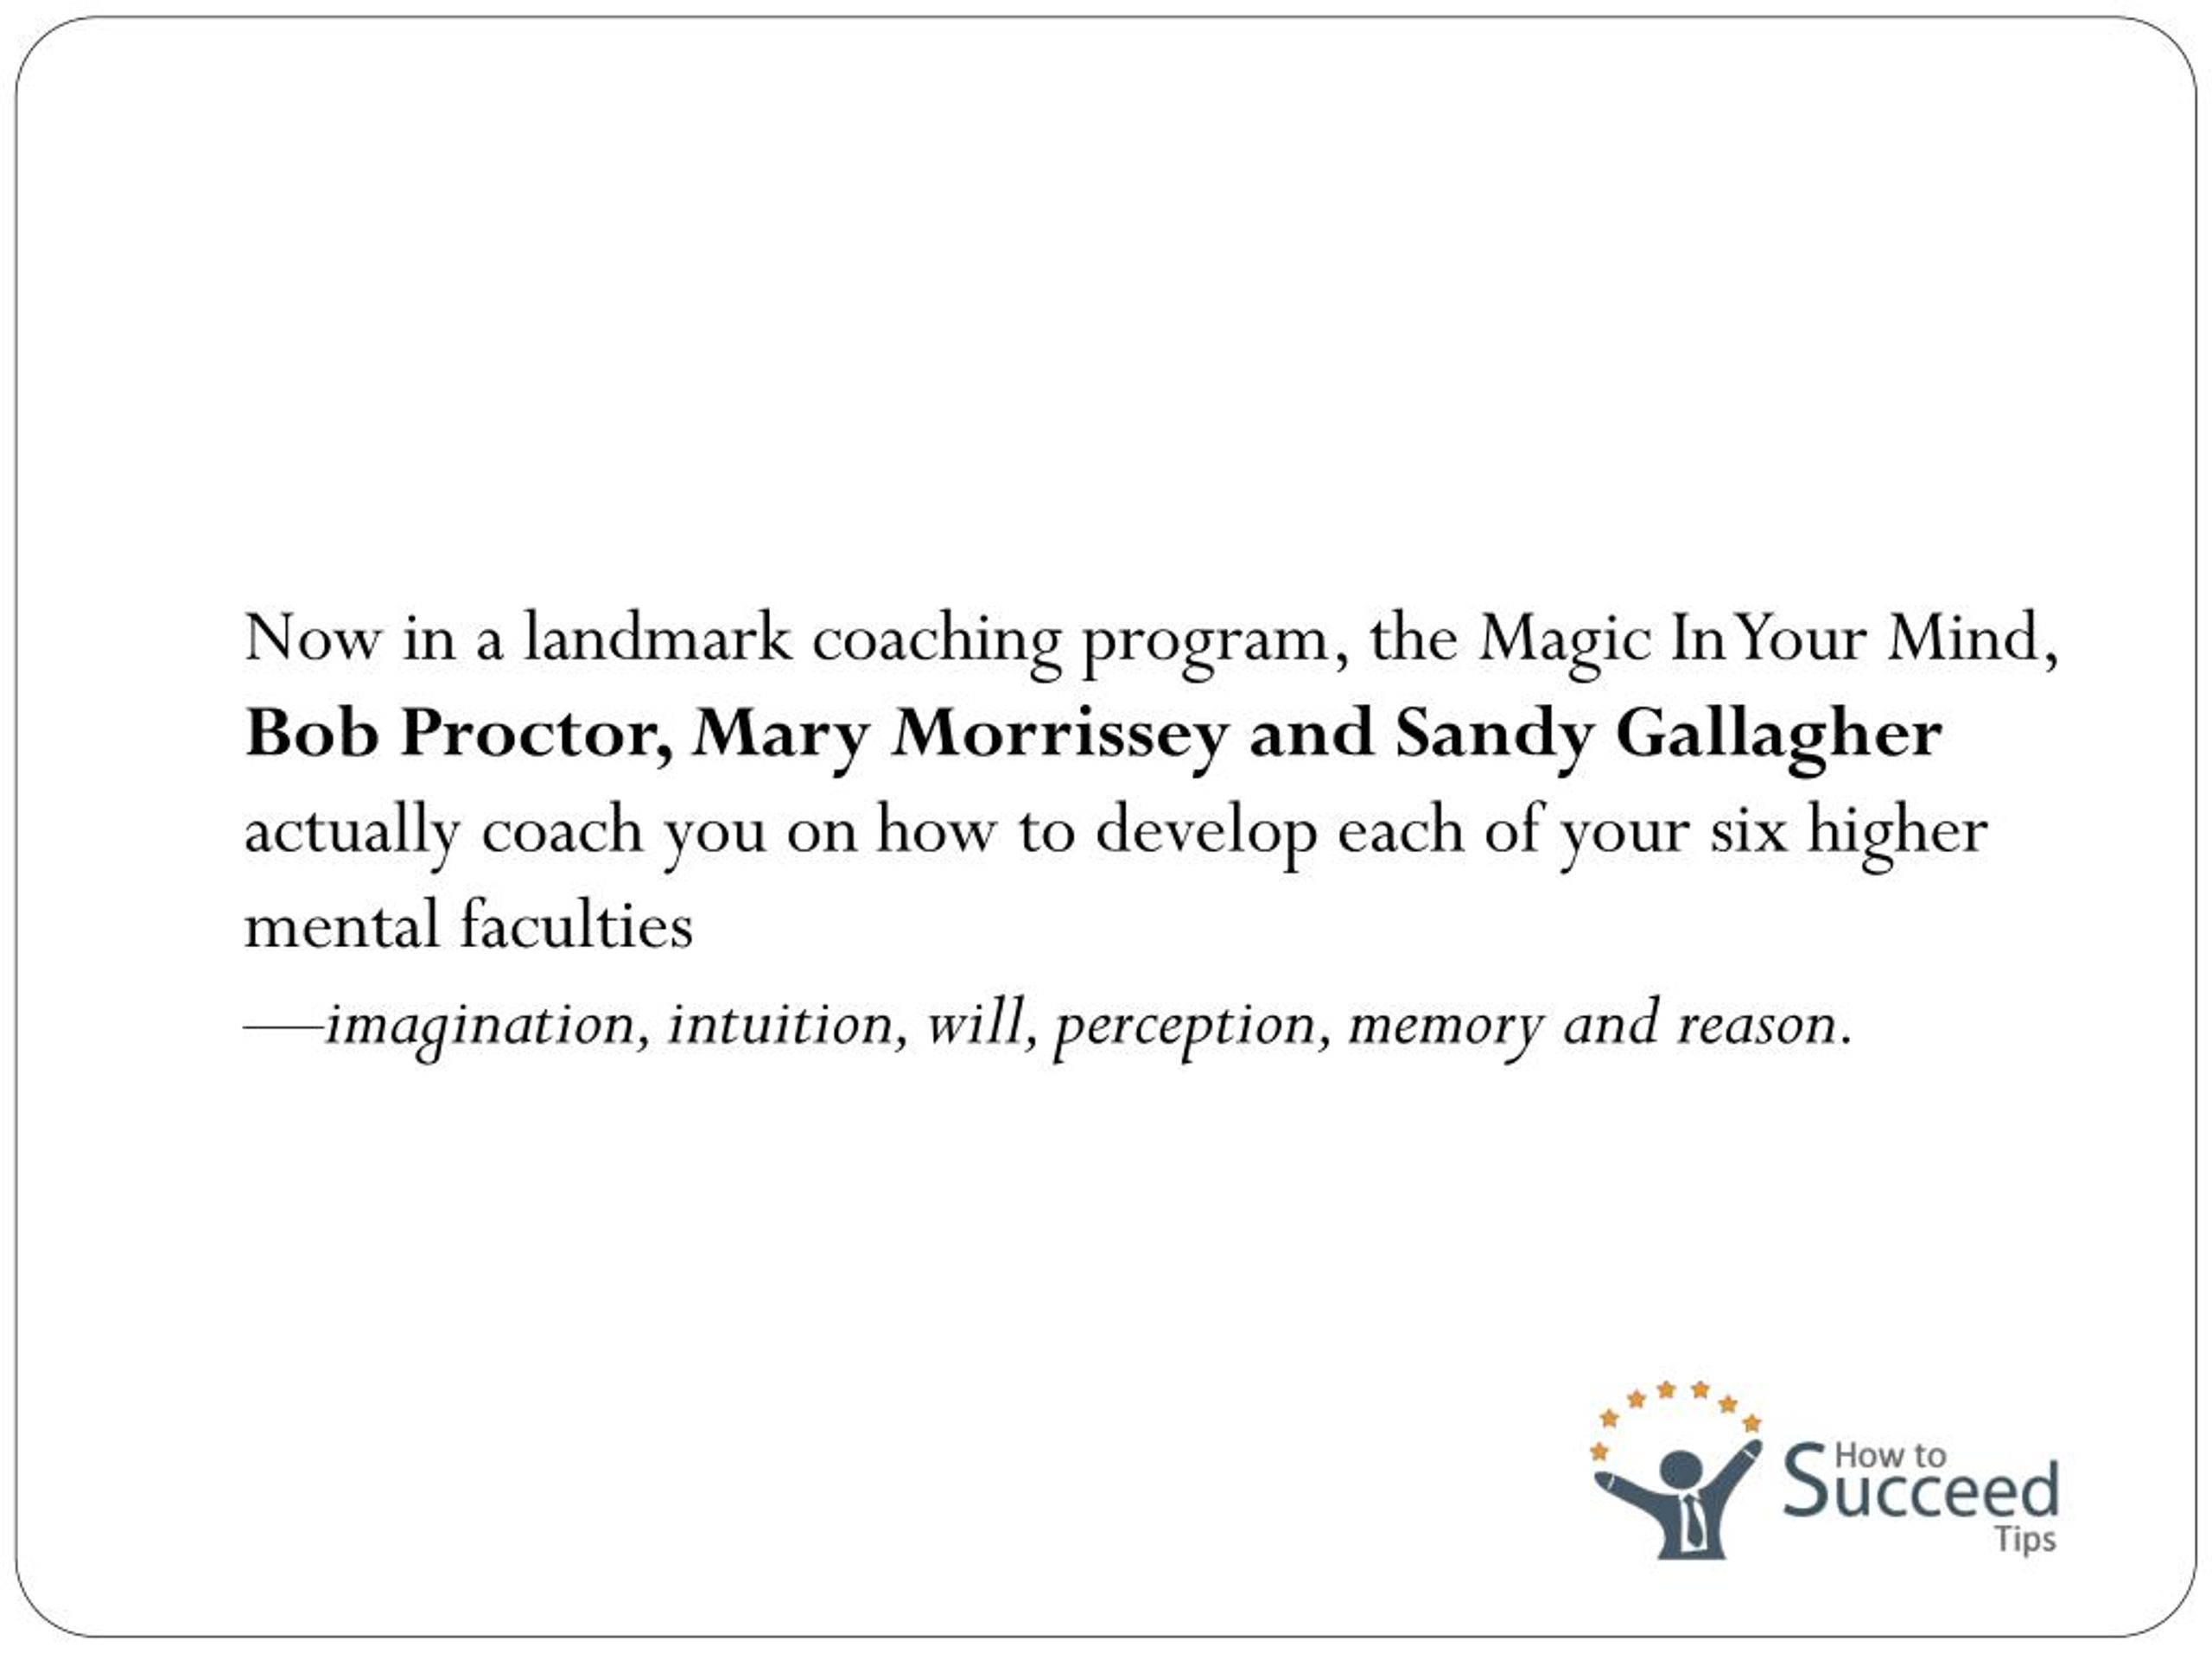 PPT - Magic in your Mind PowerPoint Presentation, free download - ID:7268969